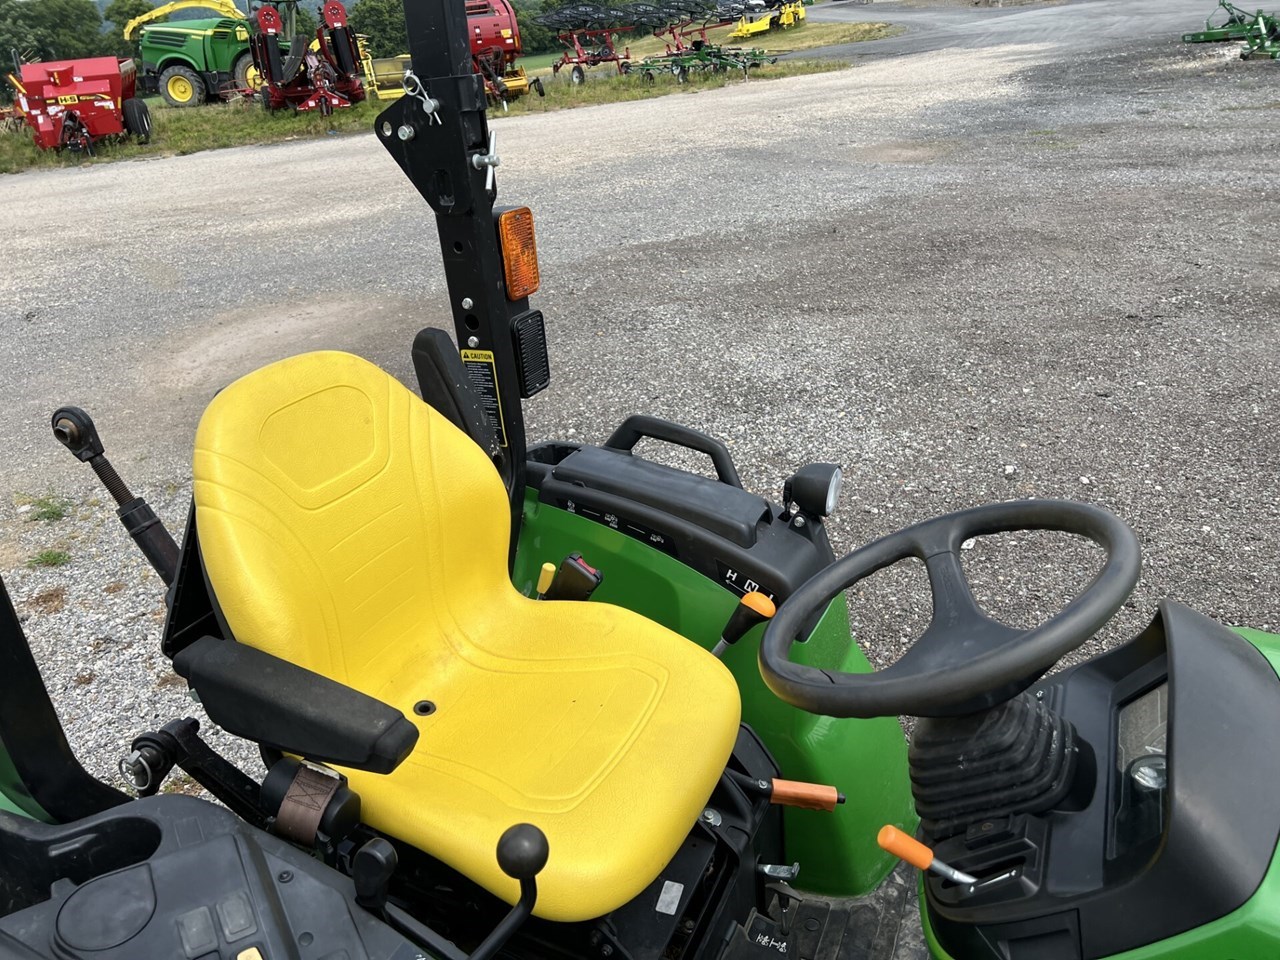 2019 John Deere 2038R Tractor - Compact Utility For Sale